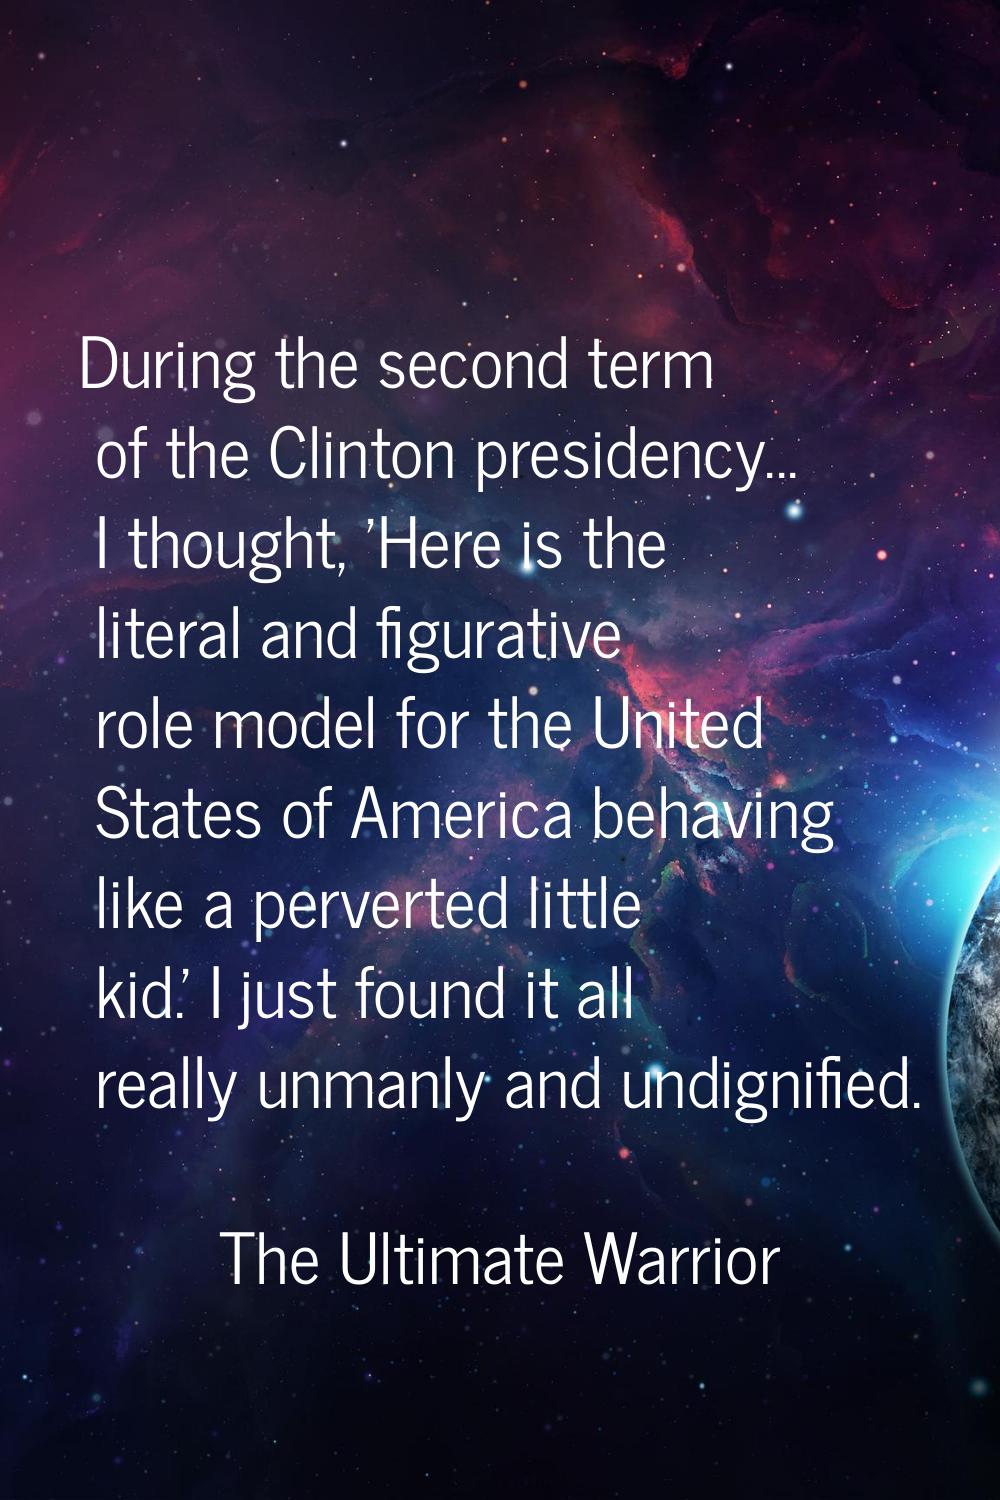 During the second term of the Clinton presidency... I thought, 'Here is the literal and figurative 